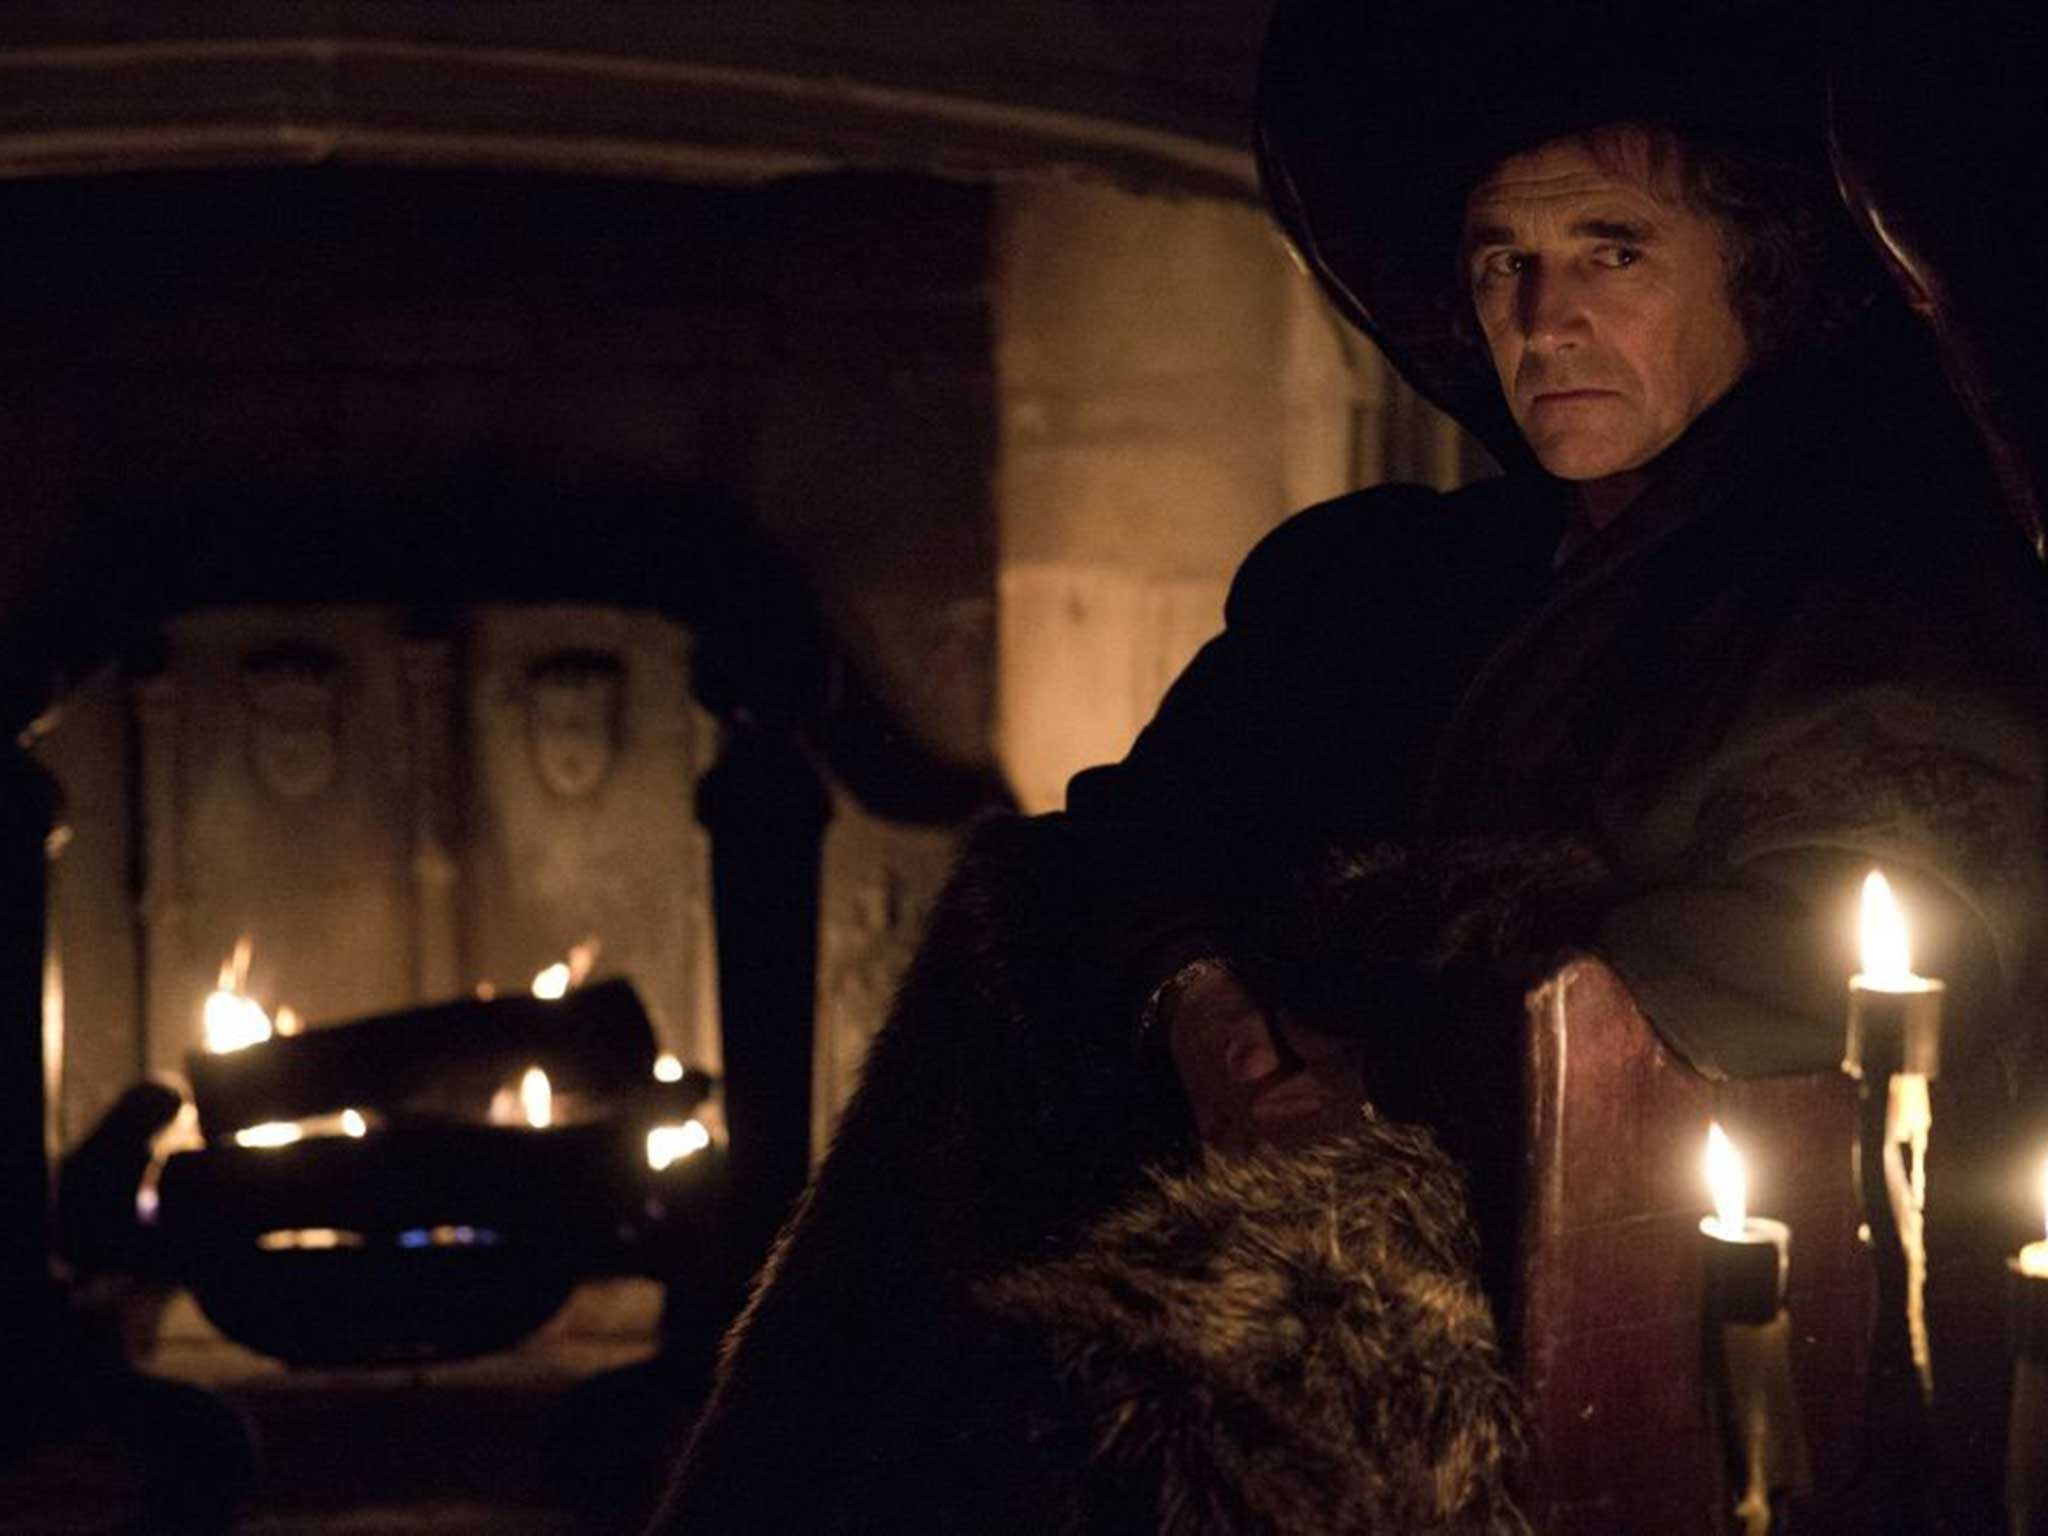 Director Peter Kosminsky used an Arri Alexa camera to film all Wolf Hall's night-time scenes by candlelight